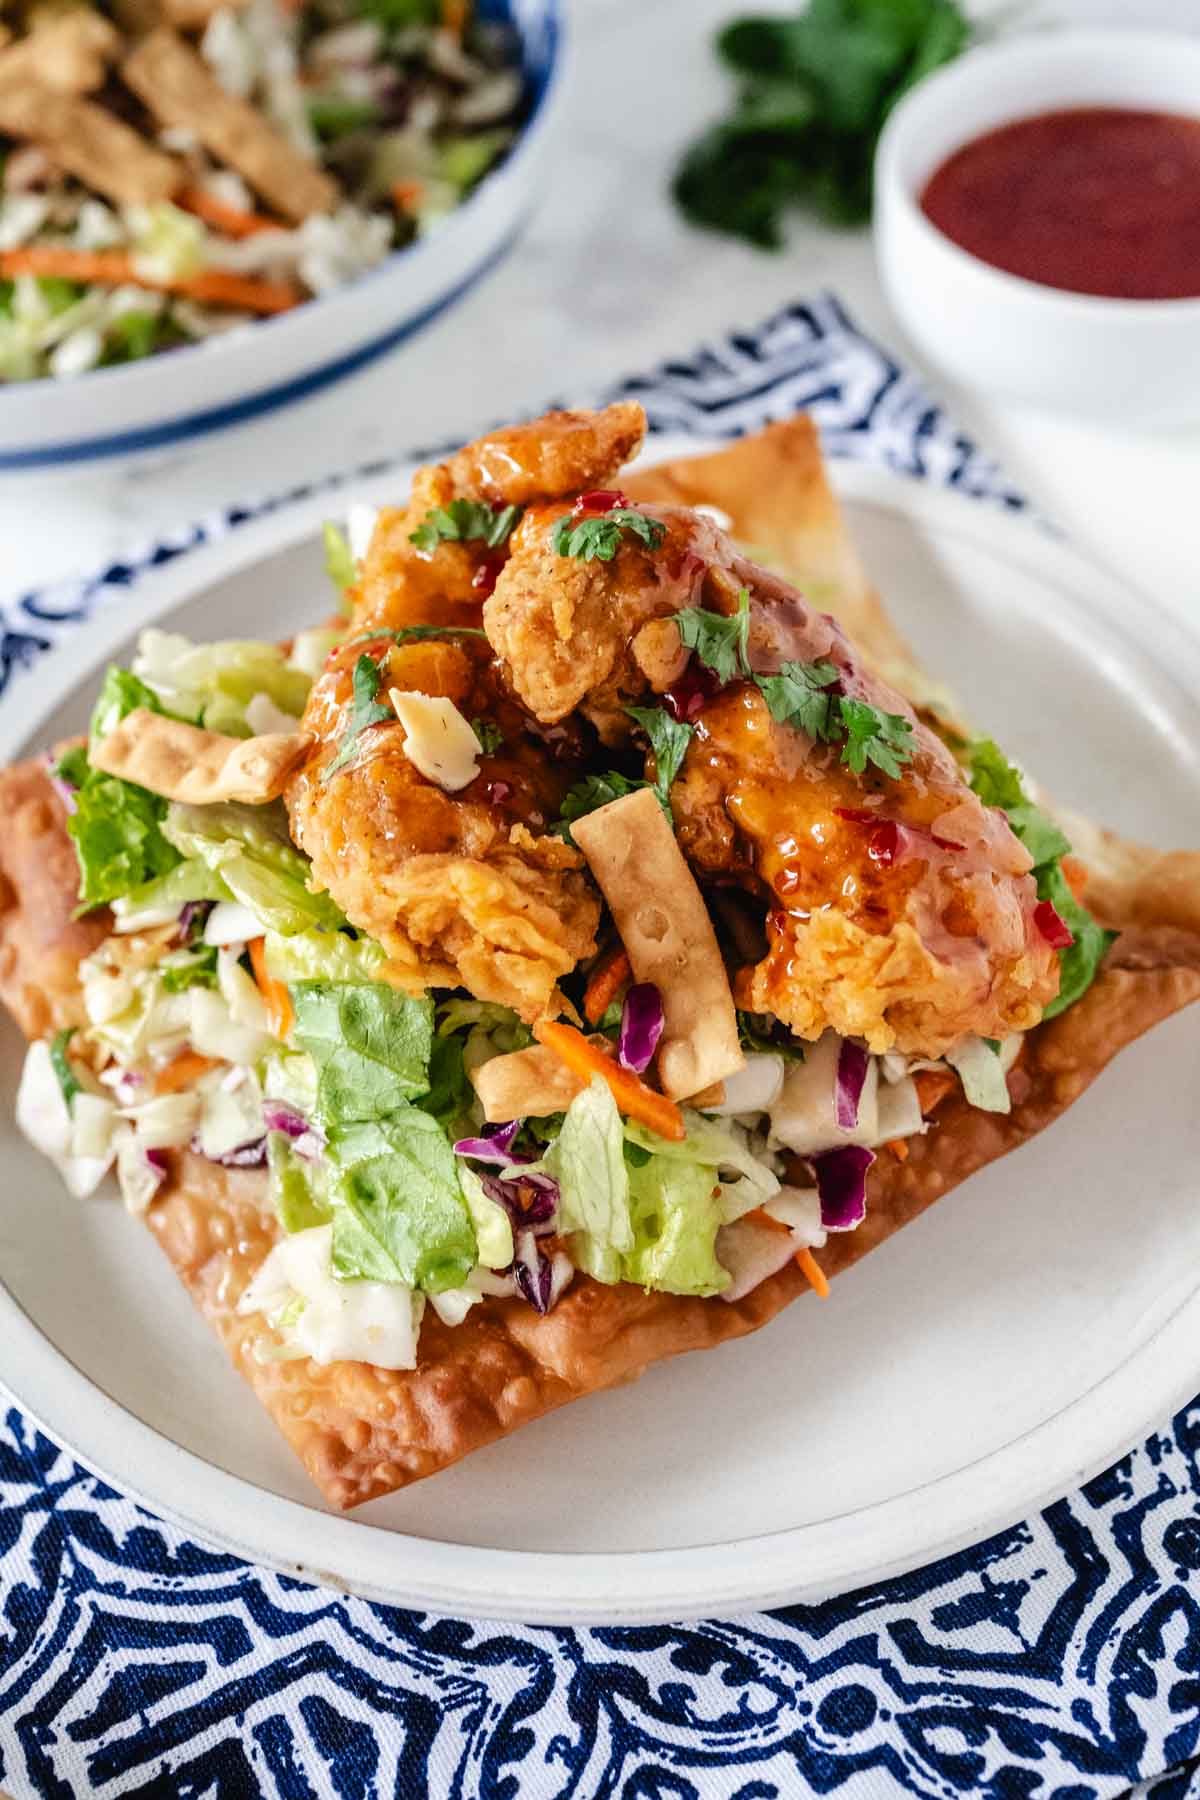 A Crispy Asian Salad stacked on a fried wonton wrapper.